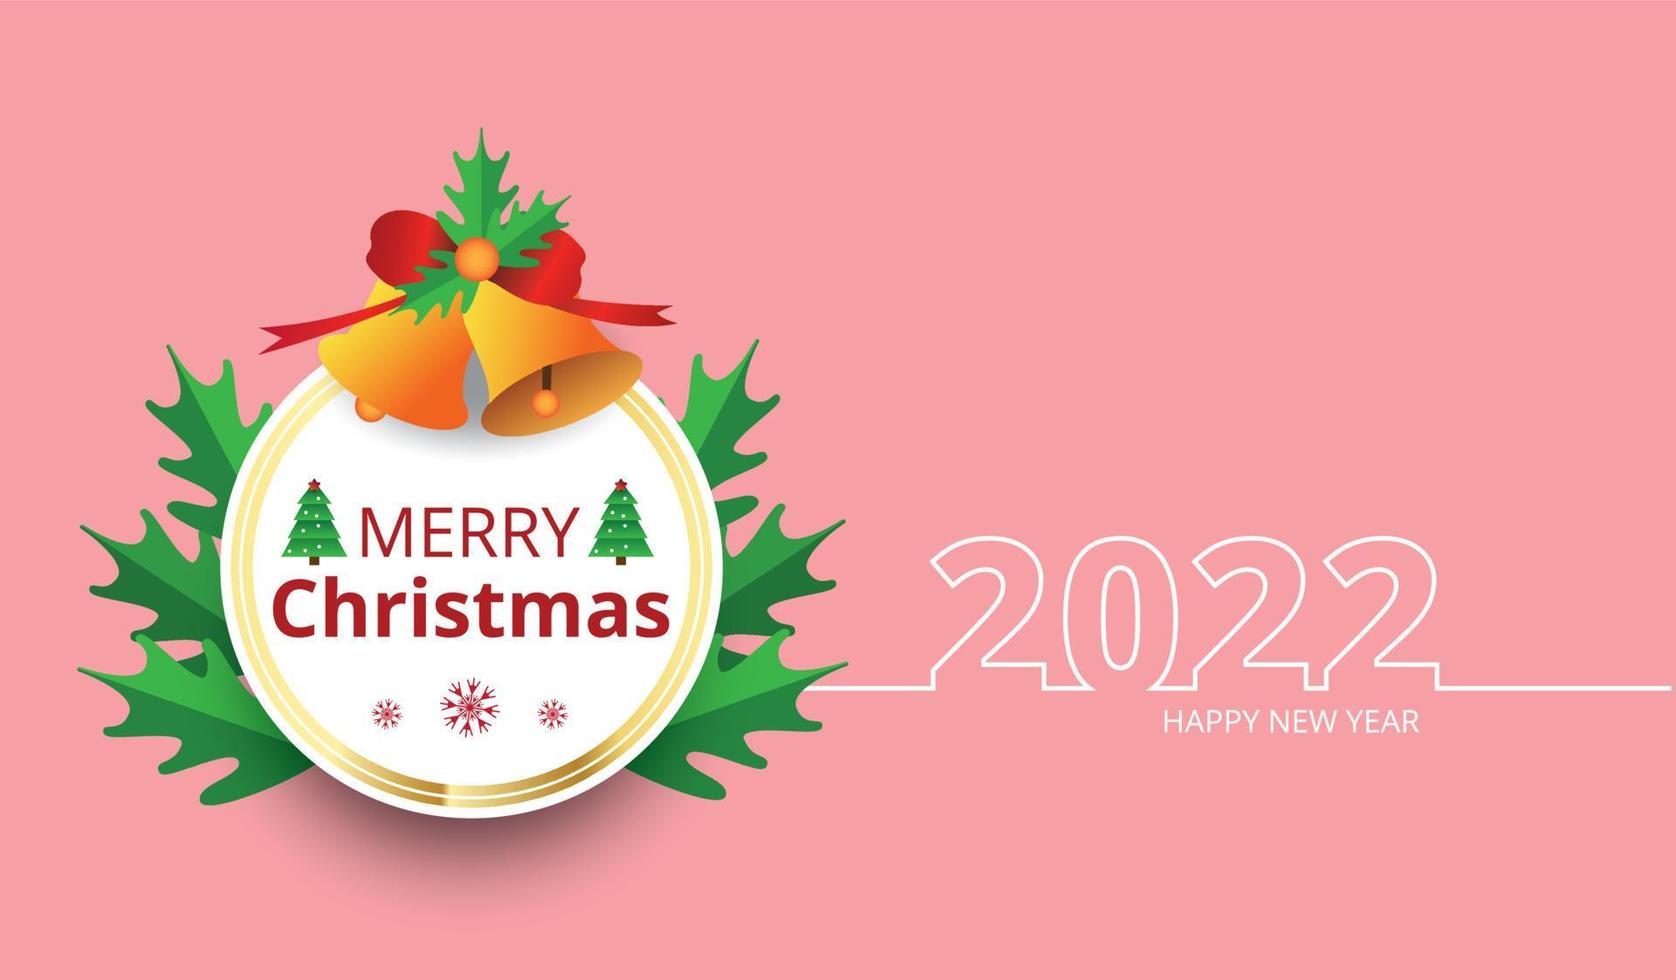 Merry Christmas frame on red with stars and happy new year 2022, vector design.